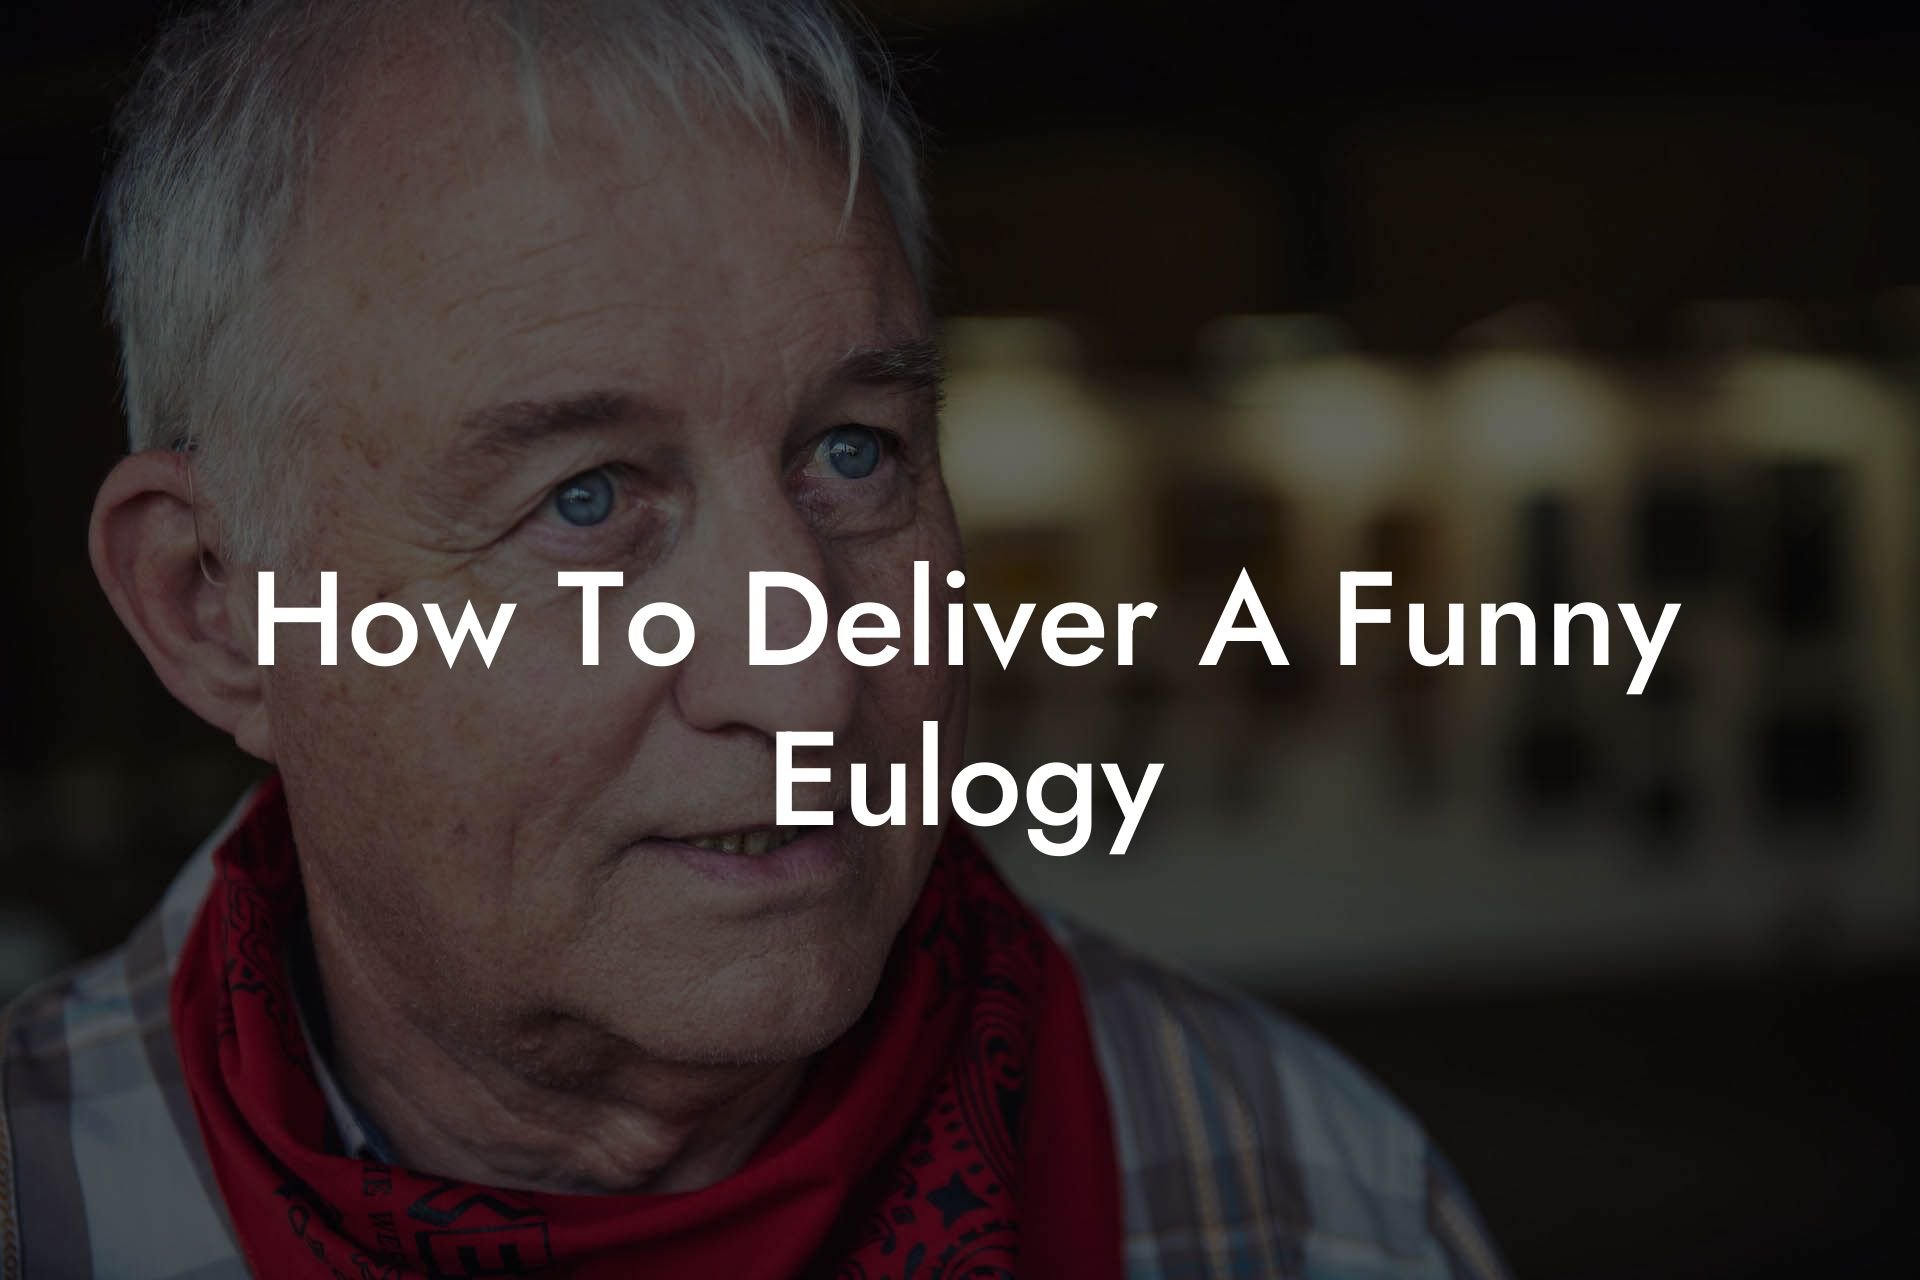 How To Deliver A Funny Eulogy